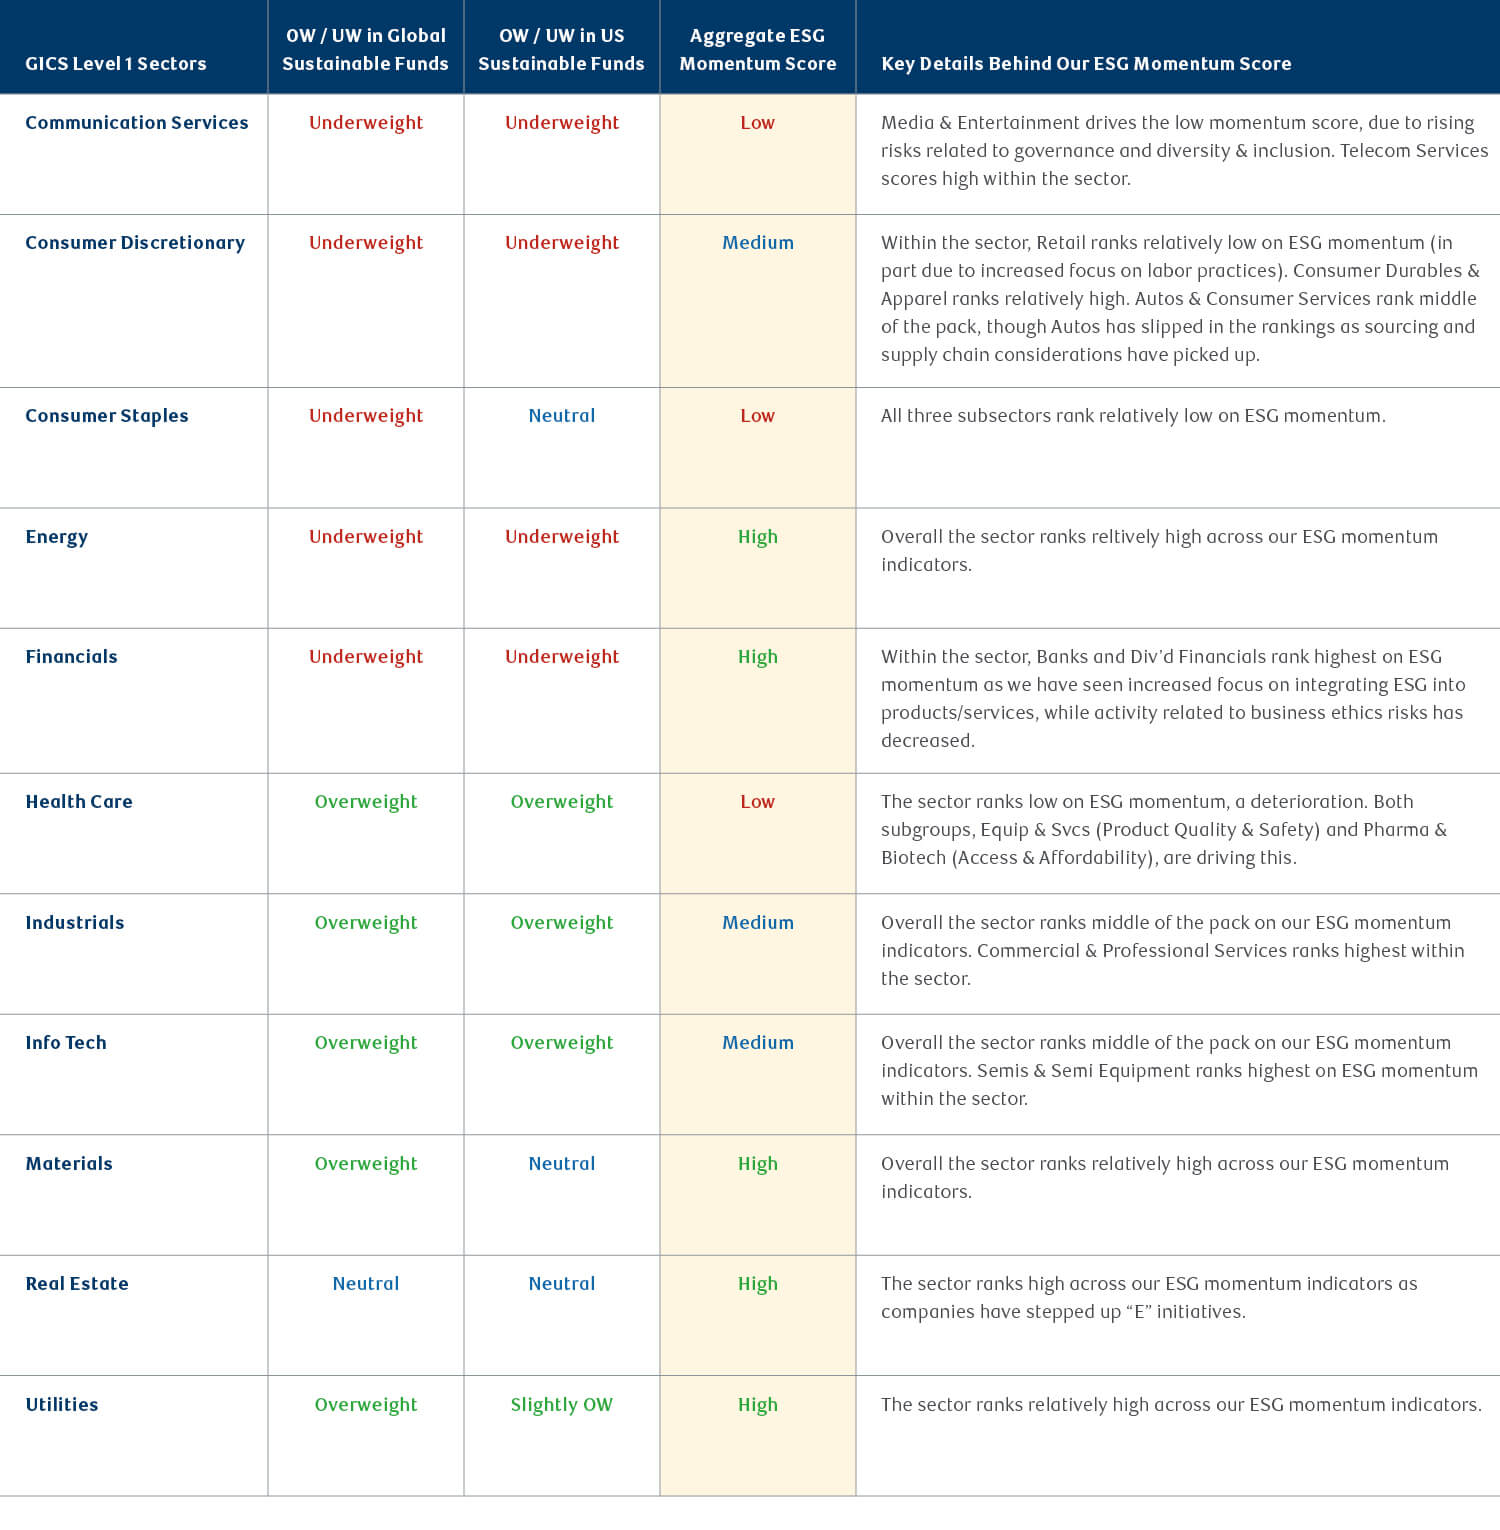 Table of GICS Level 1 Sectors, Global & US Sustainable Funds and Key Details Behind out ESG Momentum Score